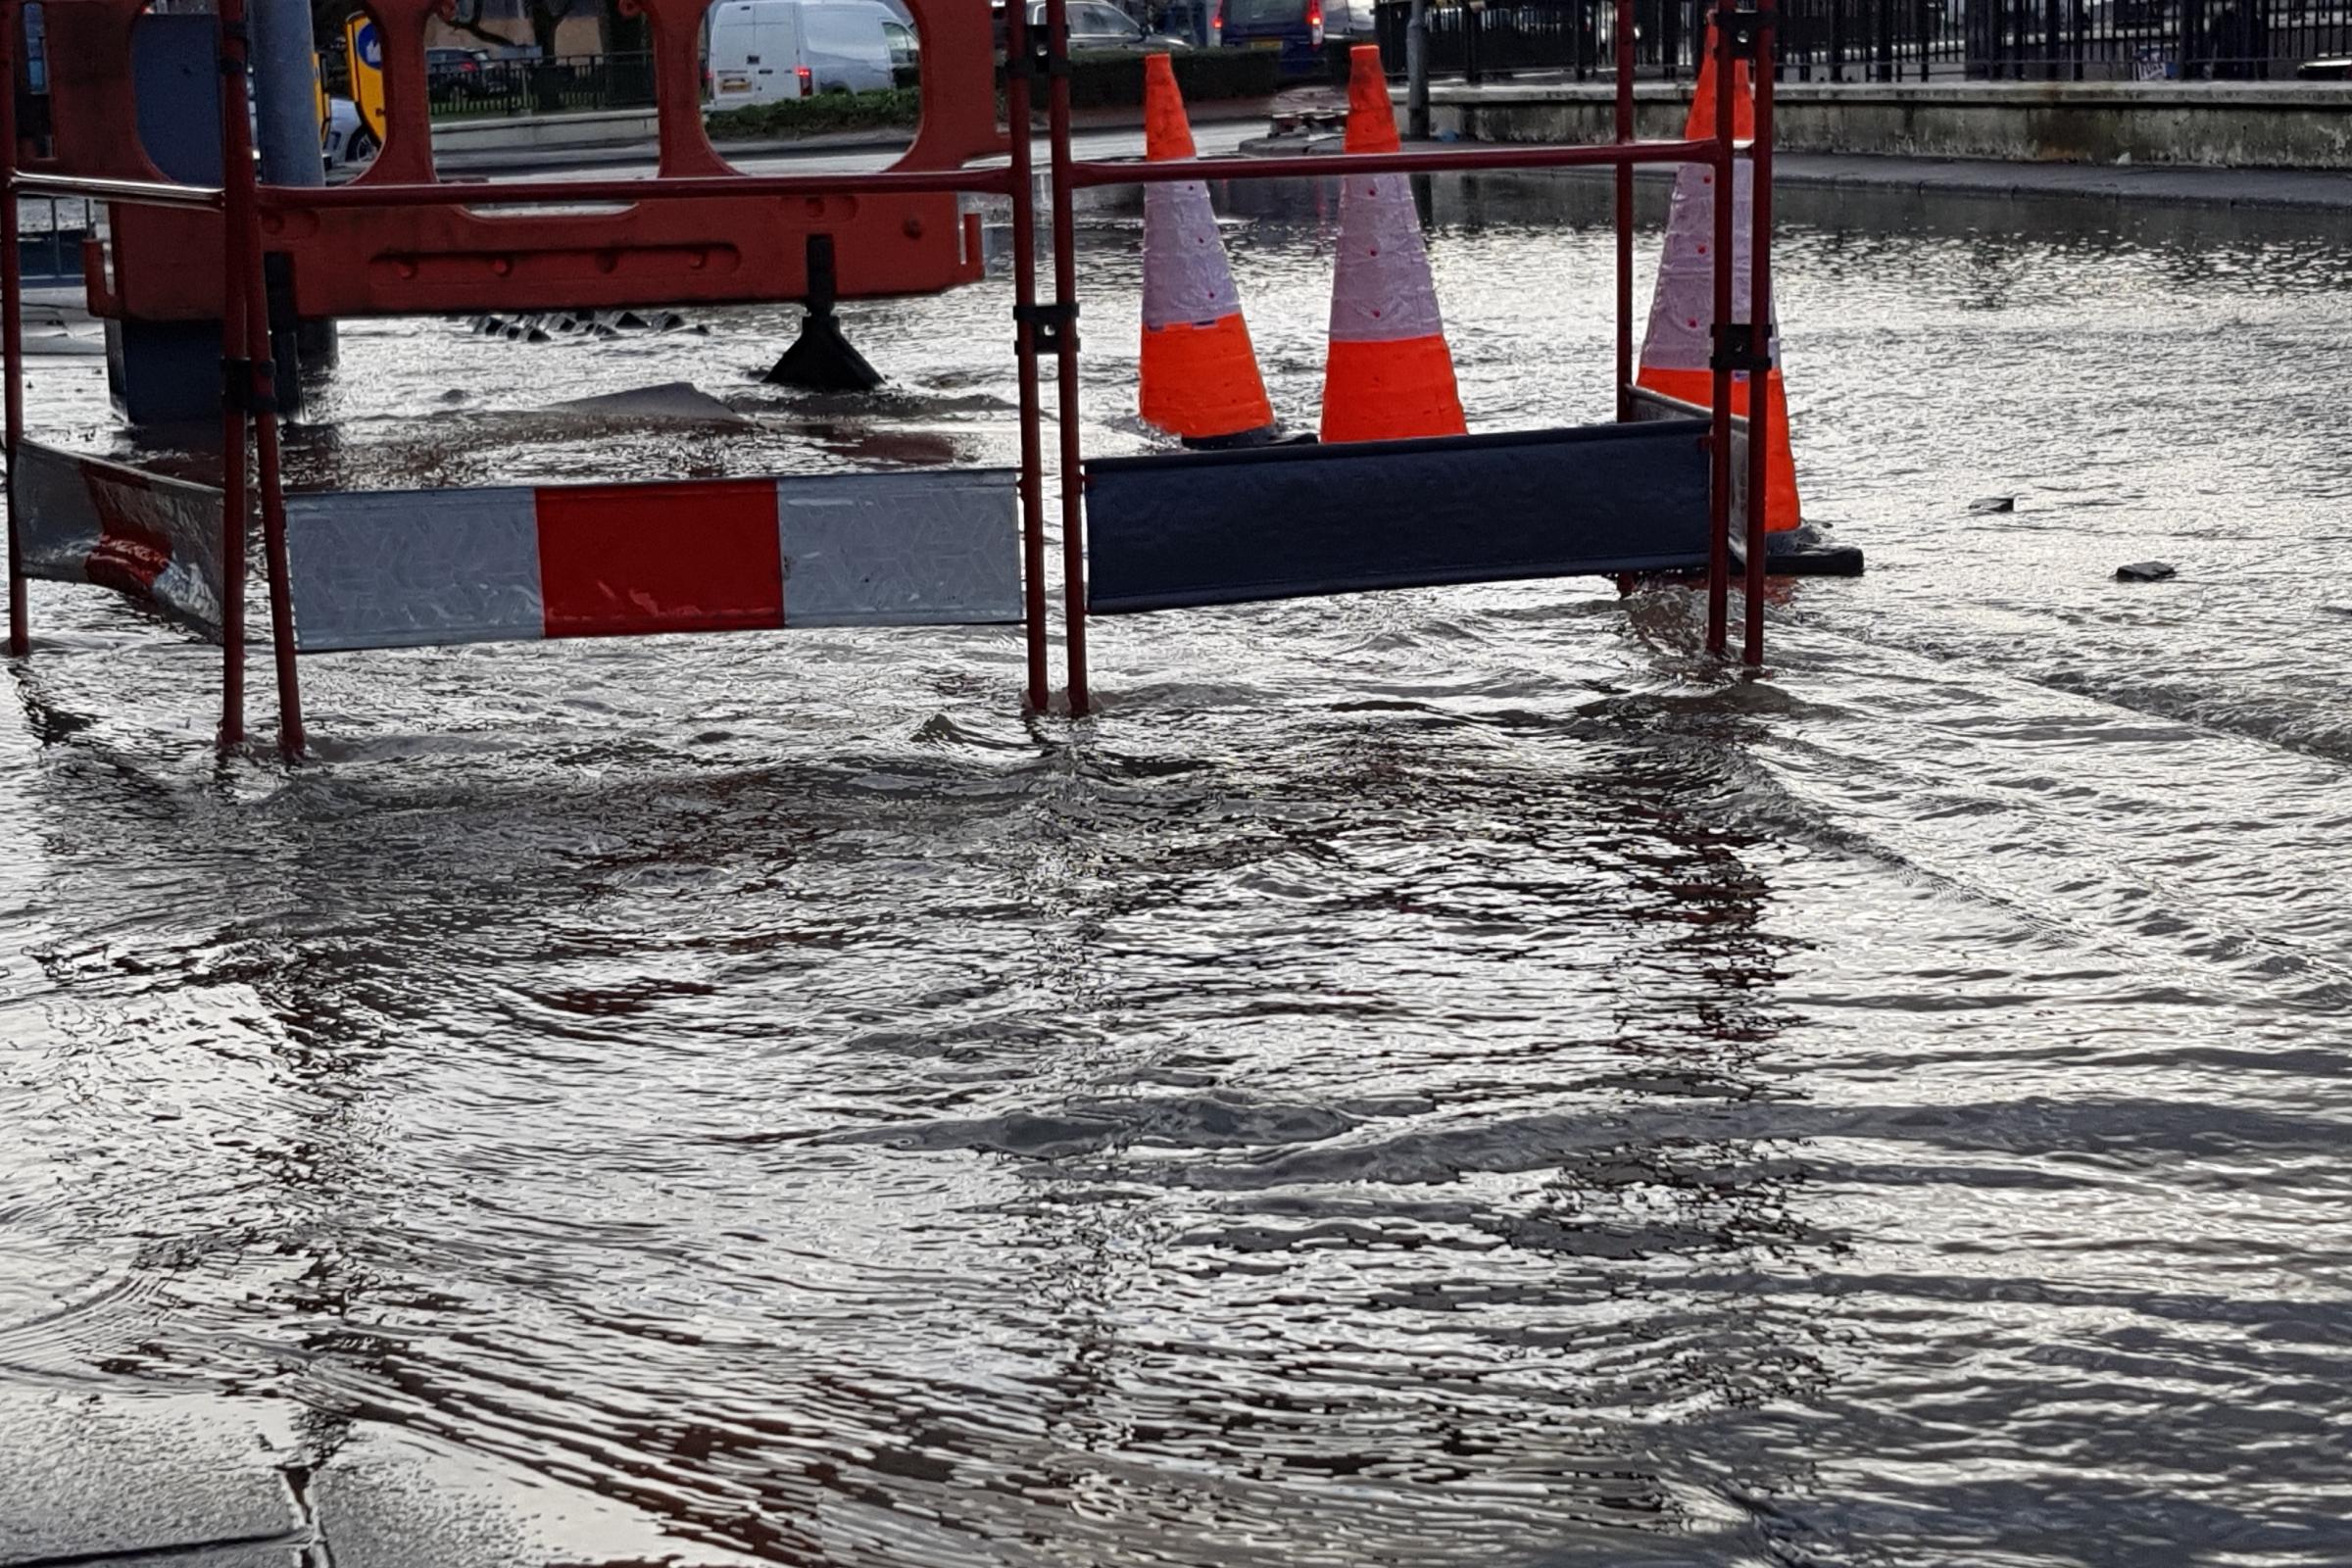 Water burst "like a lake" in town centre